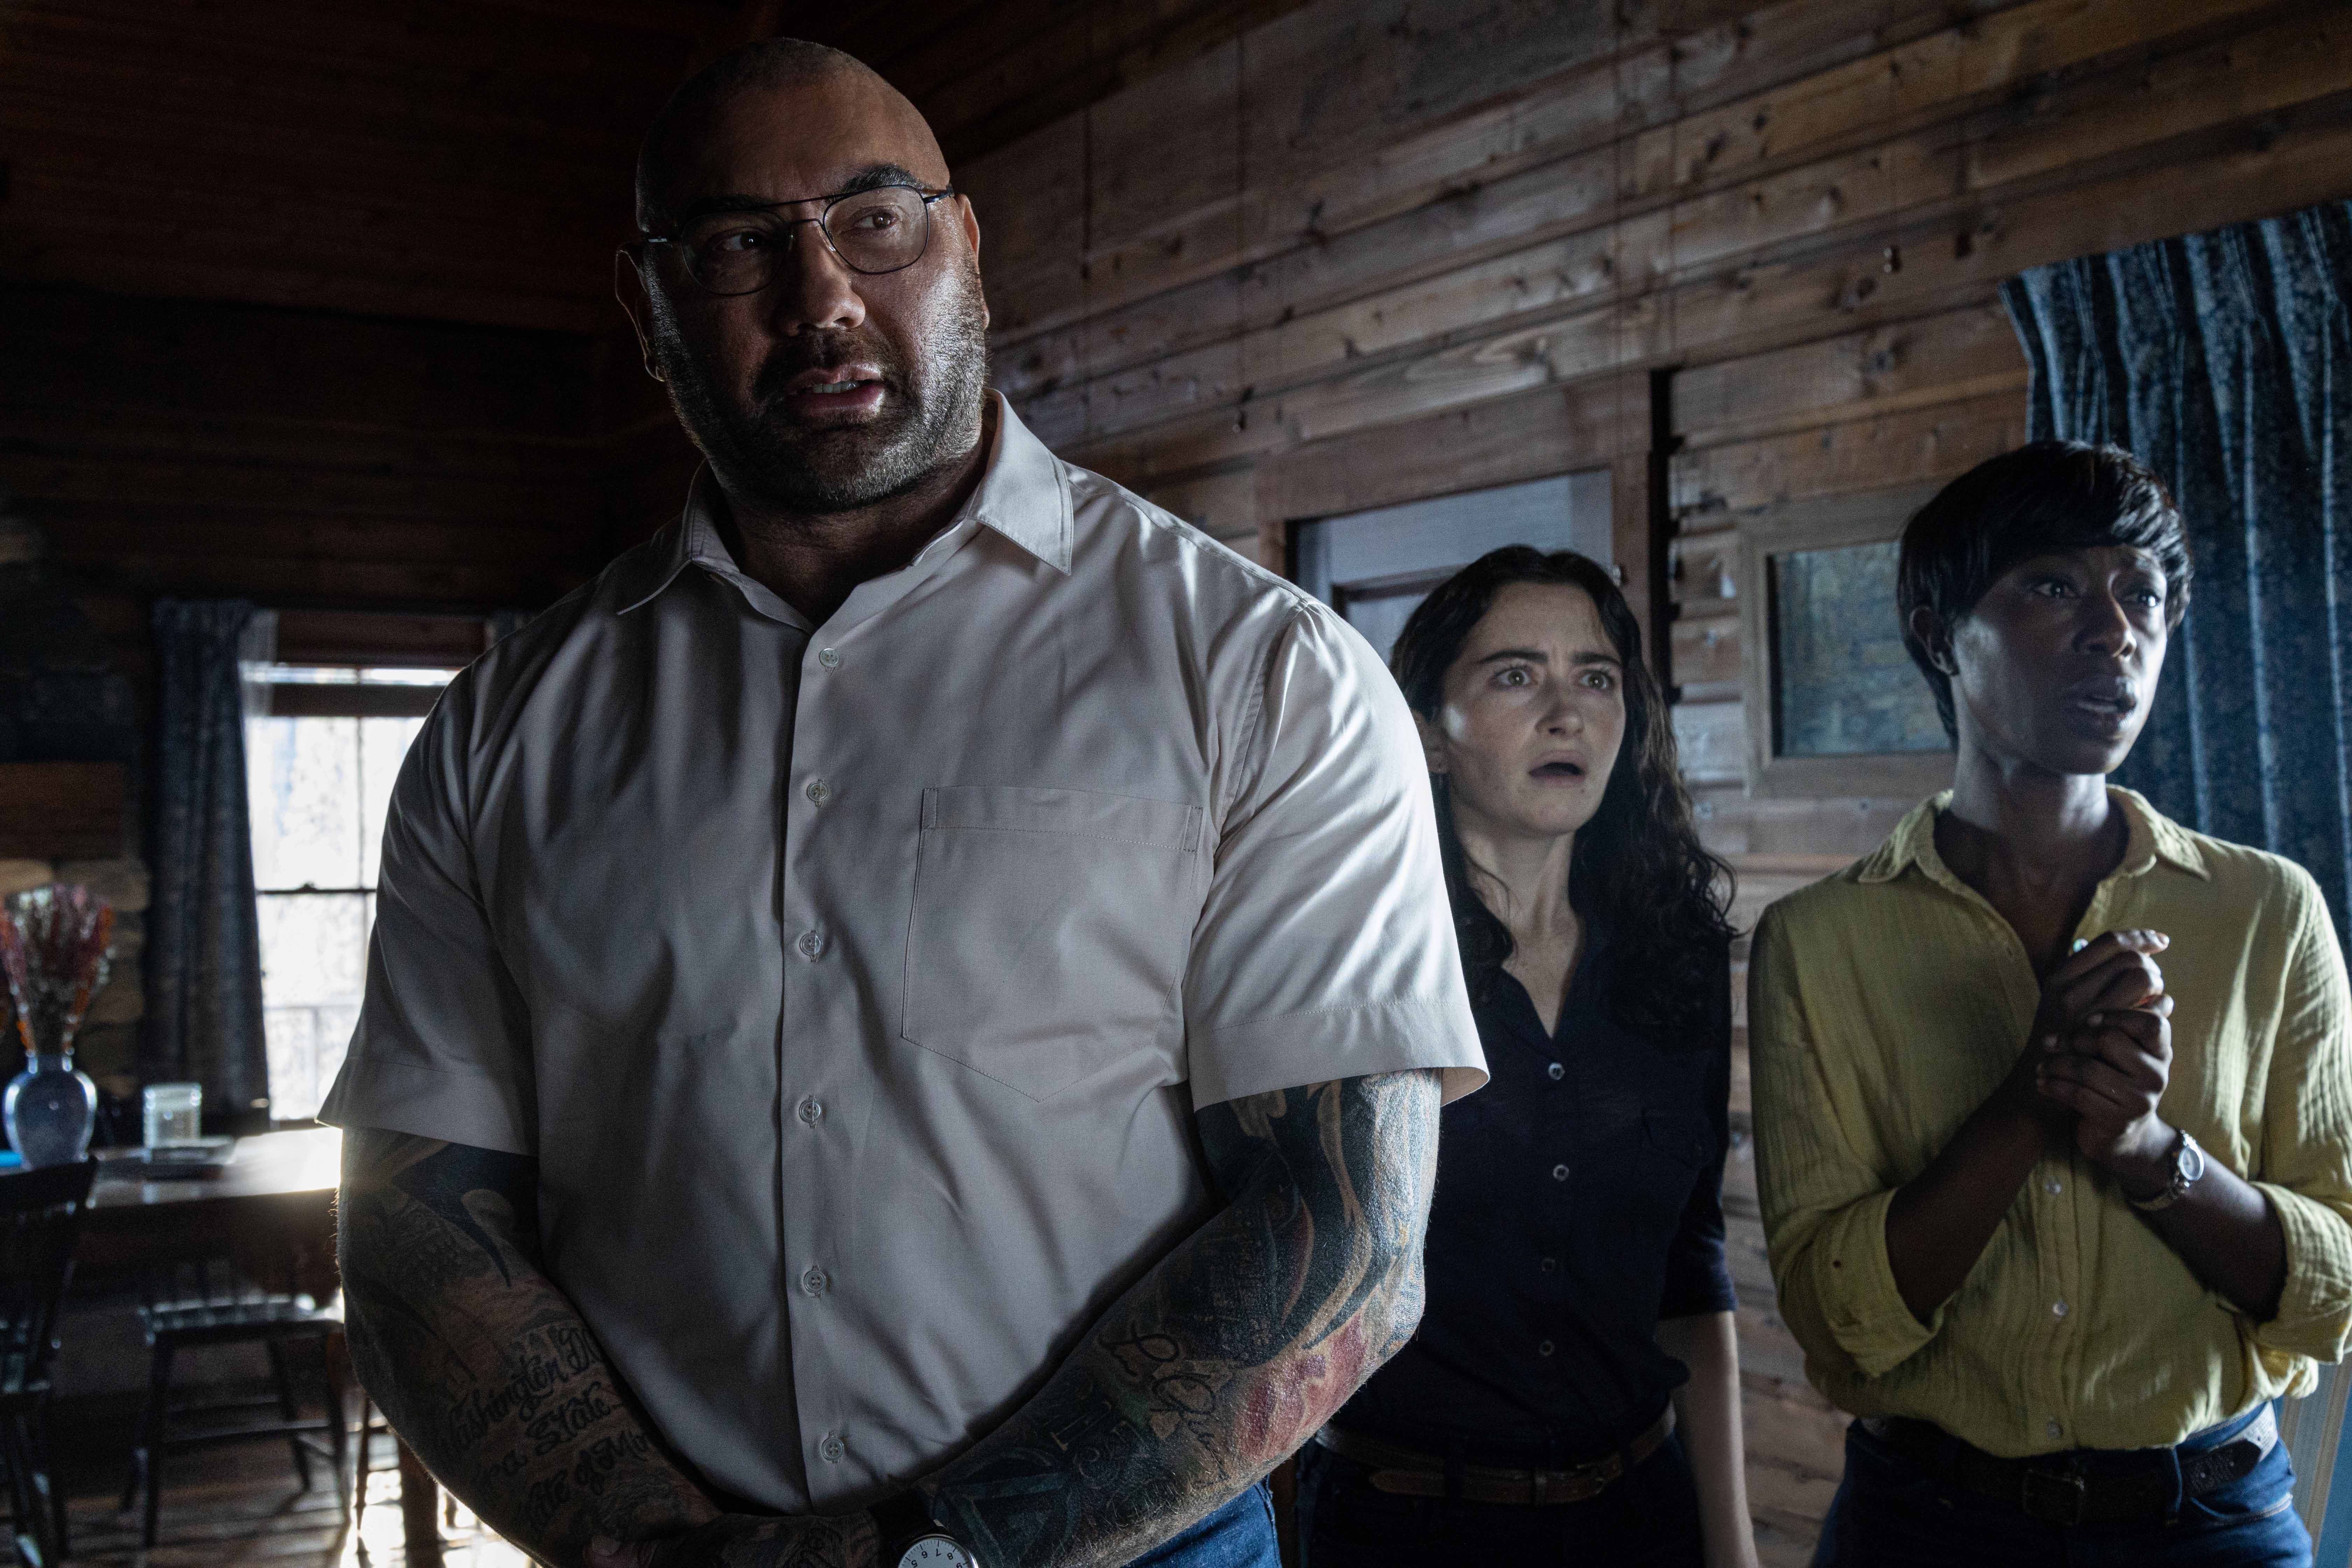 Trailer Watch: Dave Bautista Ruins Family Vacation In M Night Shyamalan’s Knock At The Cabin